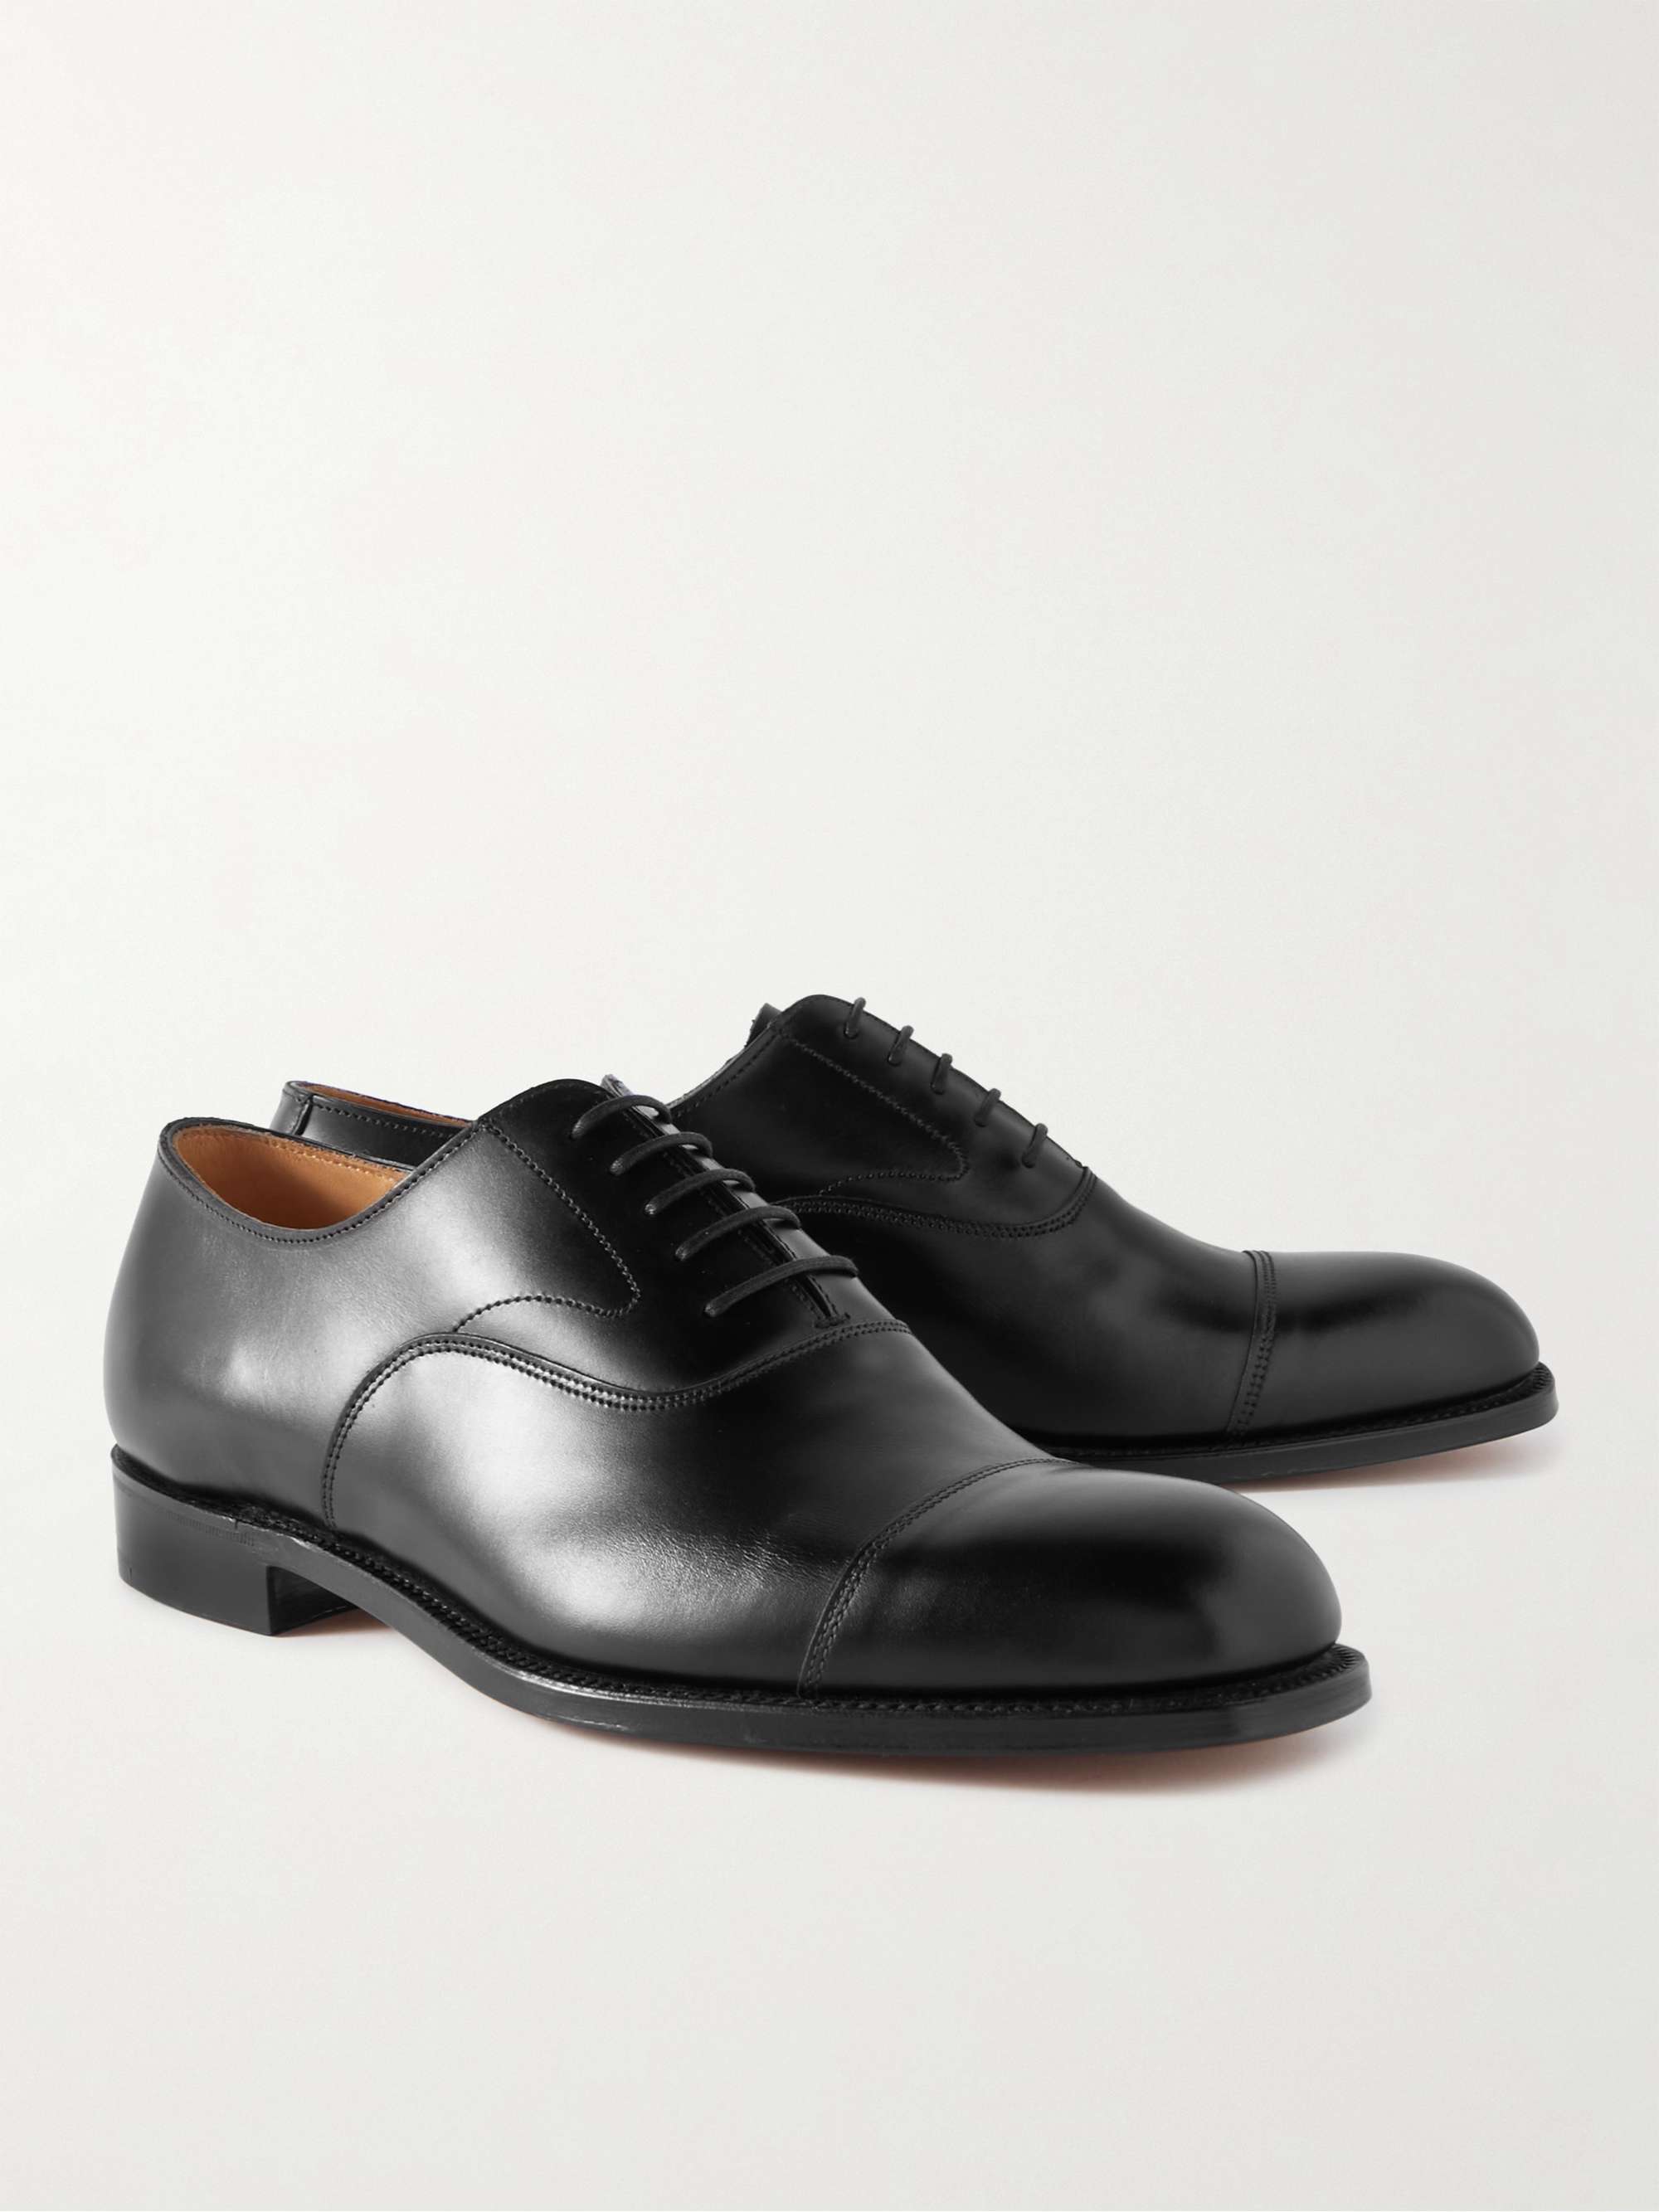 GRENSON Cambridge Leather Oxford Shoes